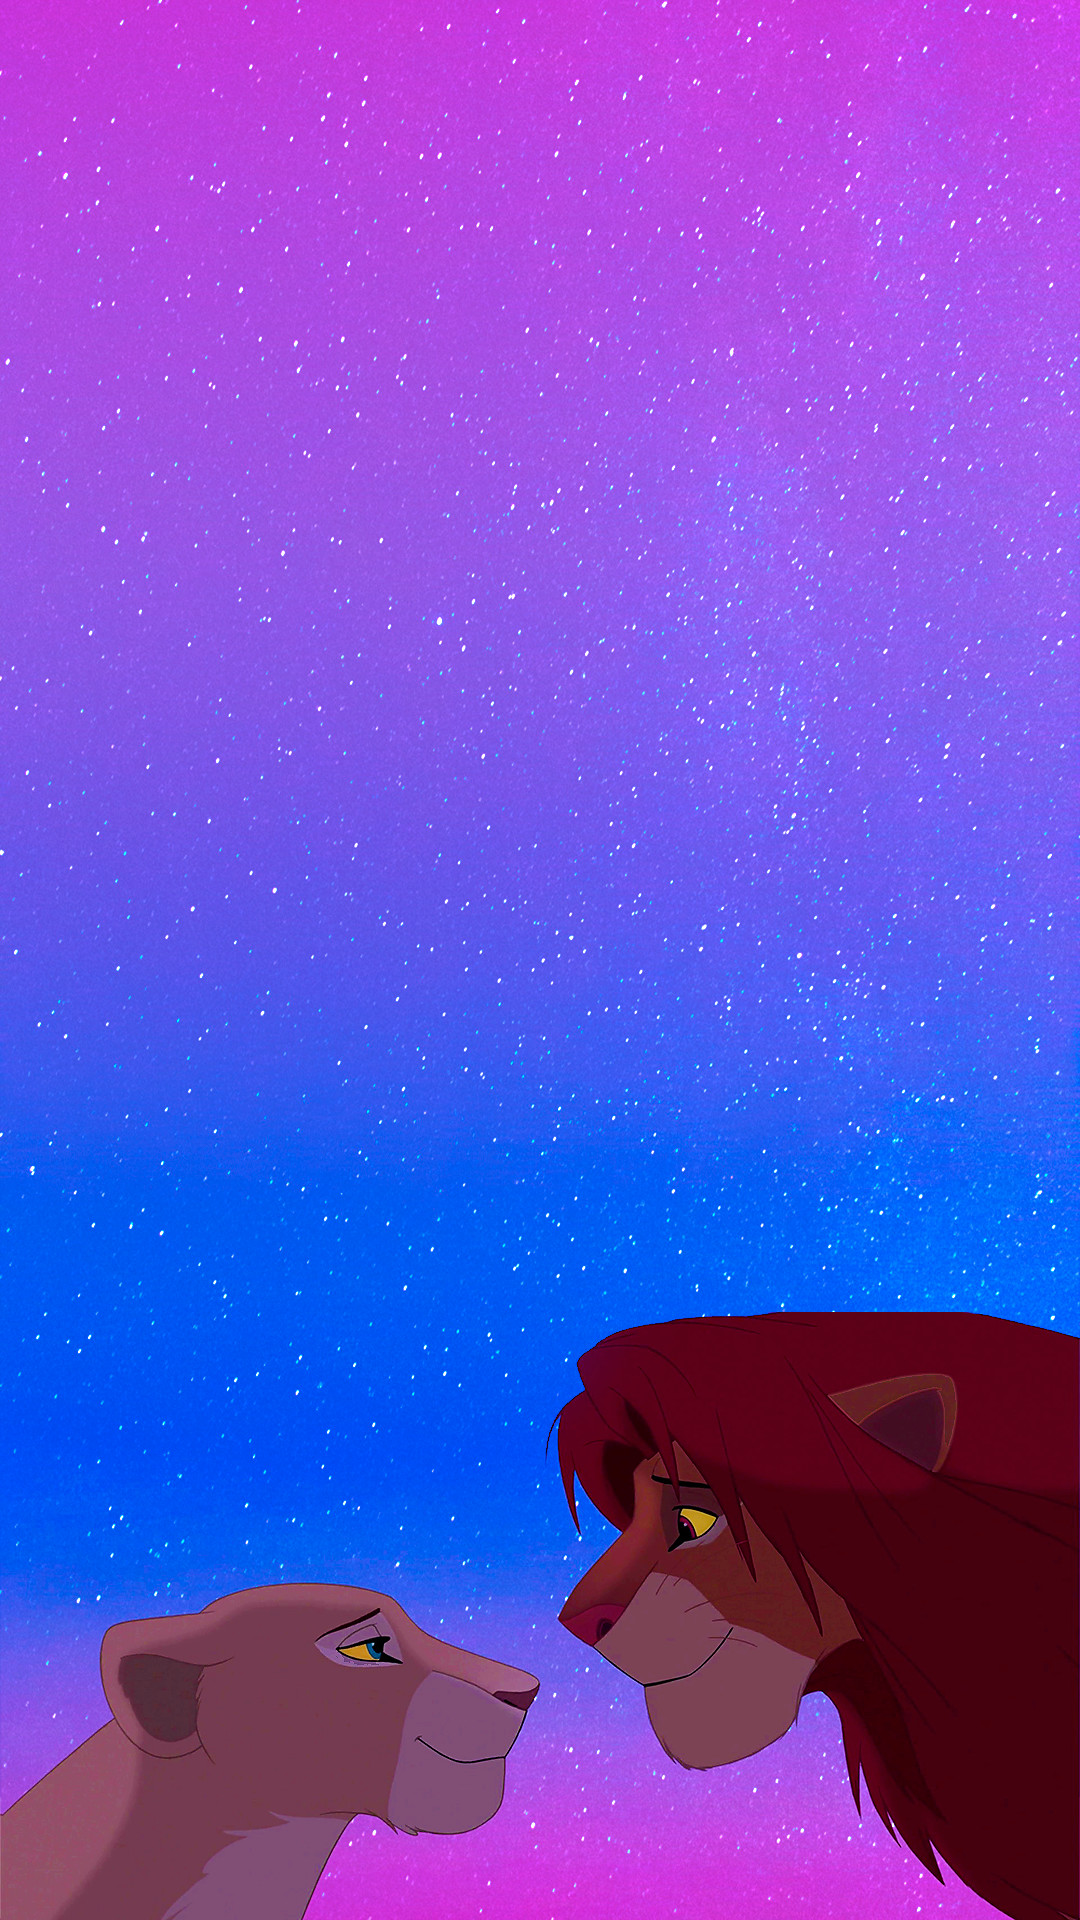 1080x1920 The Lion King background - you can find the rest on my website -